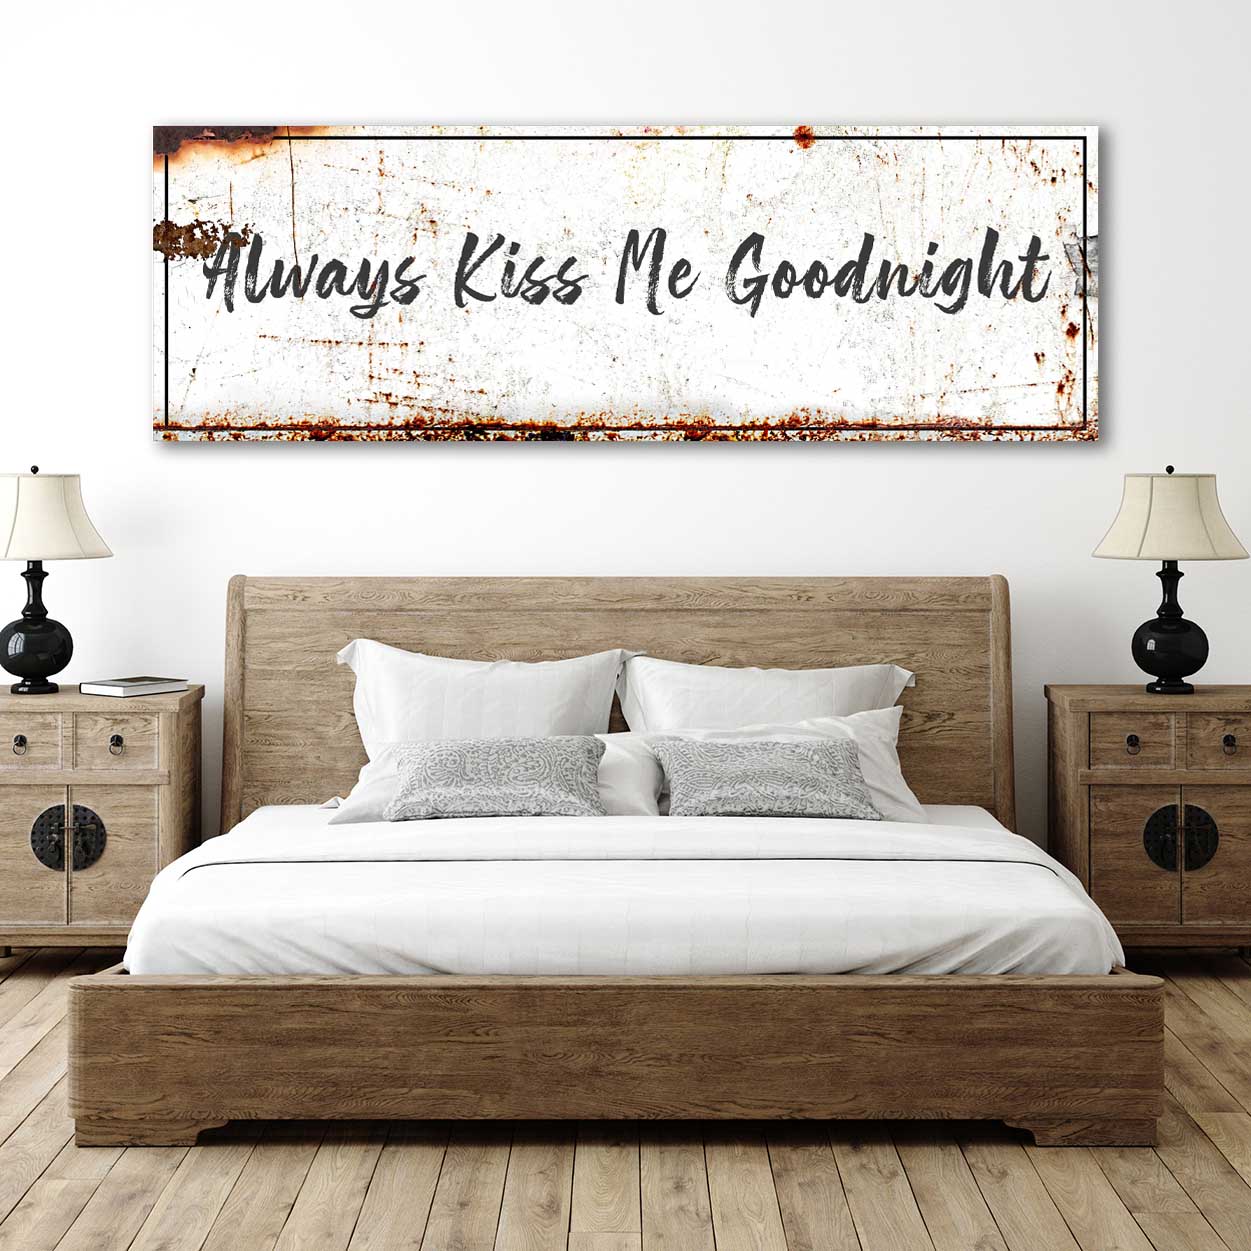 Always Kiss Me Goodnight Sign - Image by Tailored Canvases